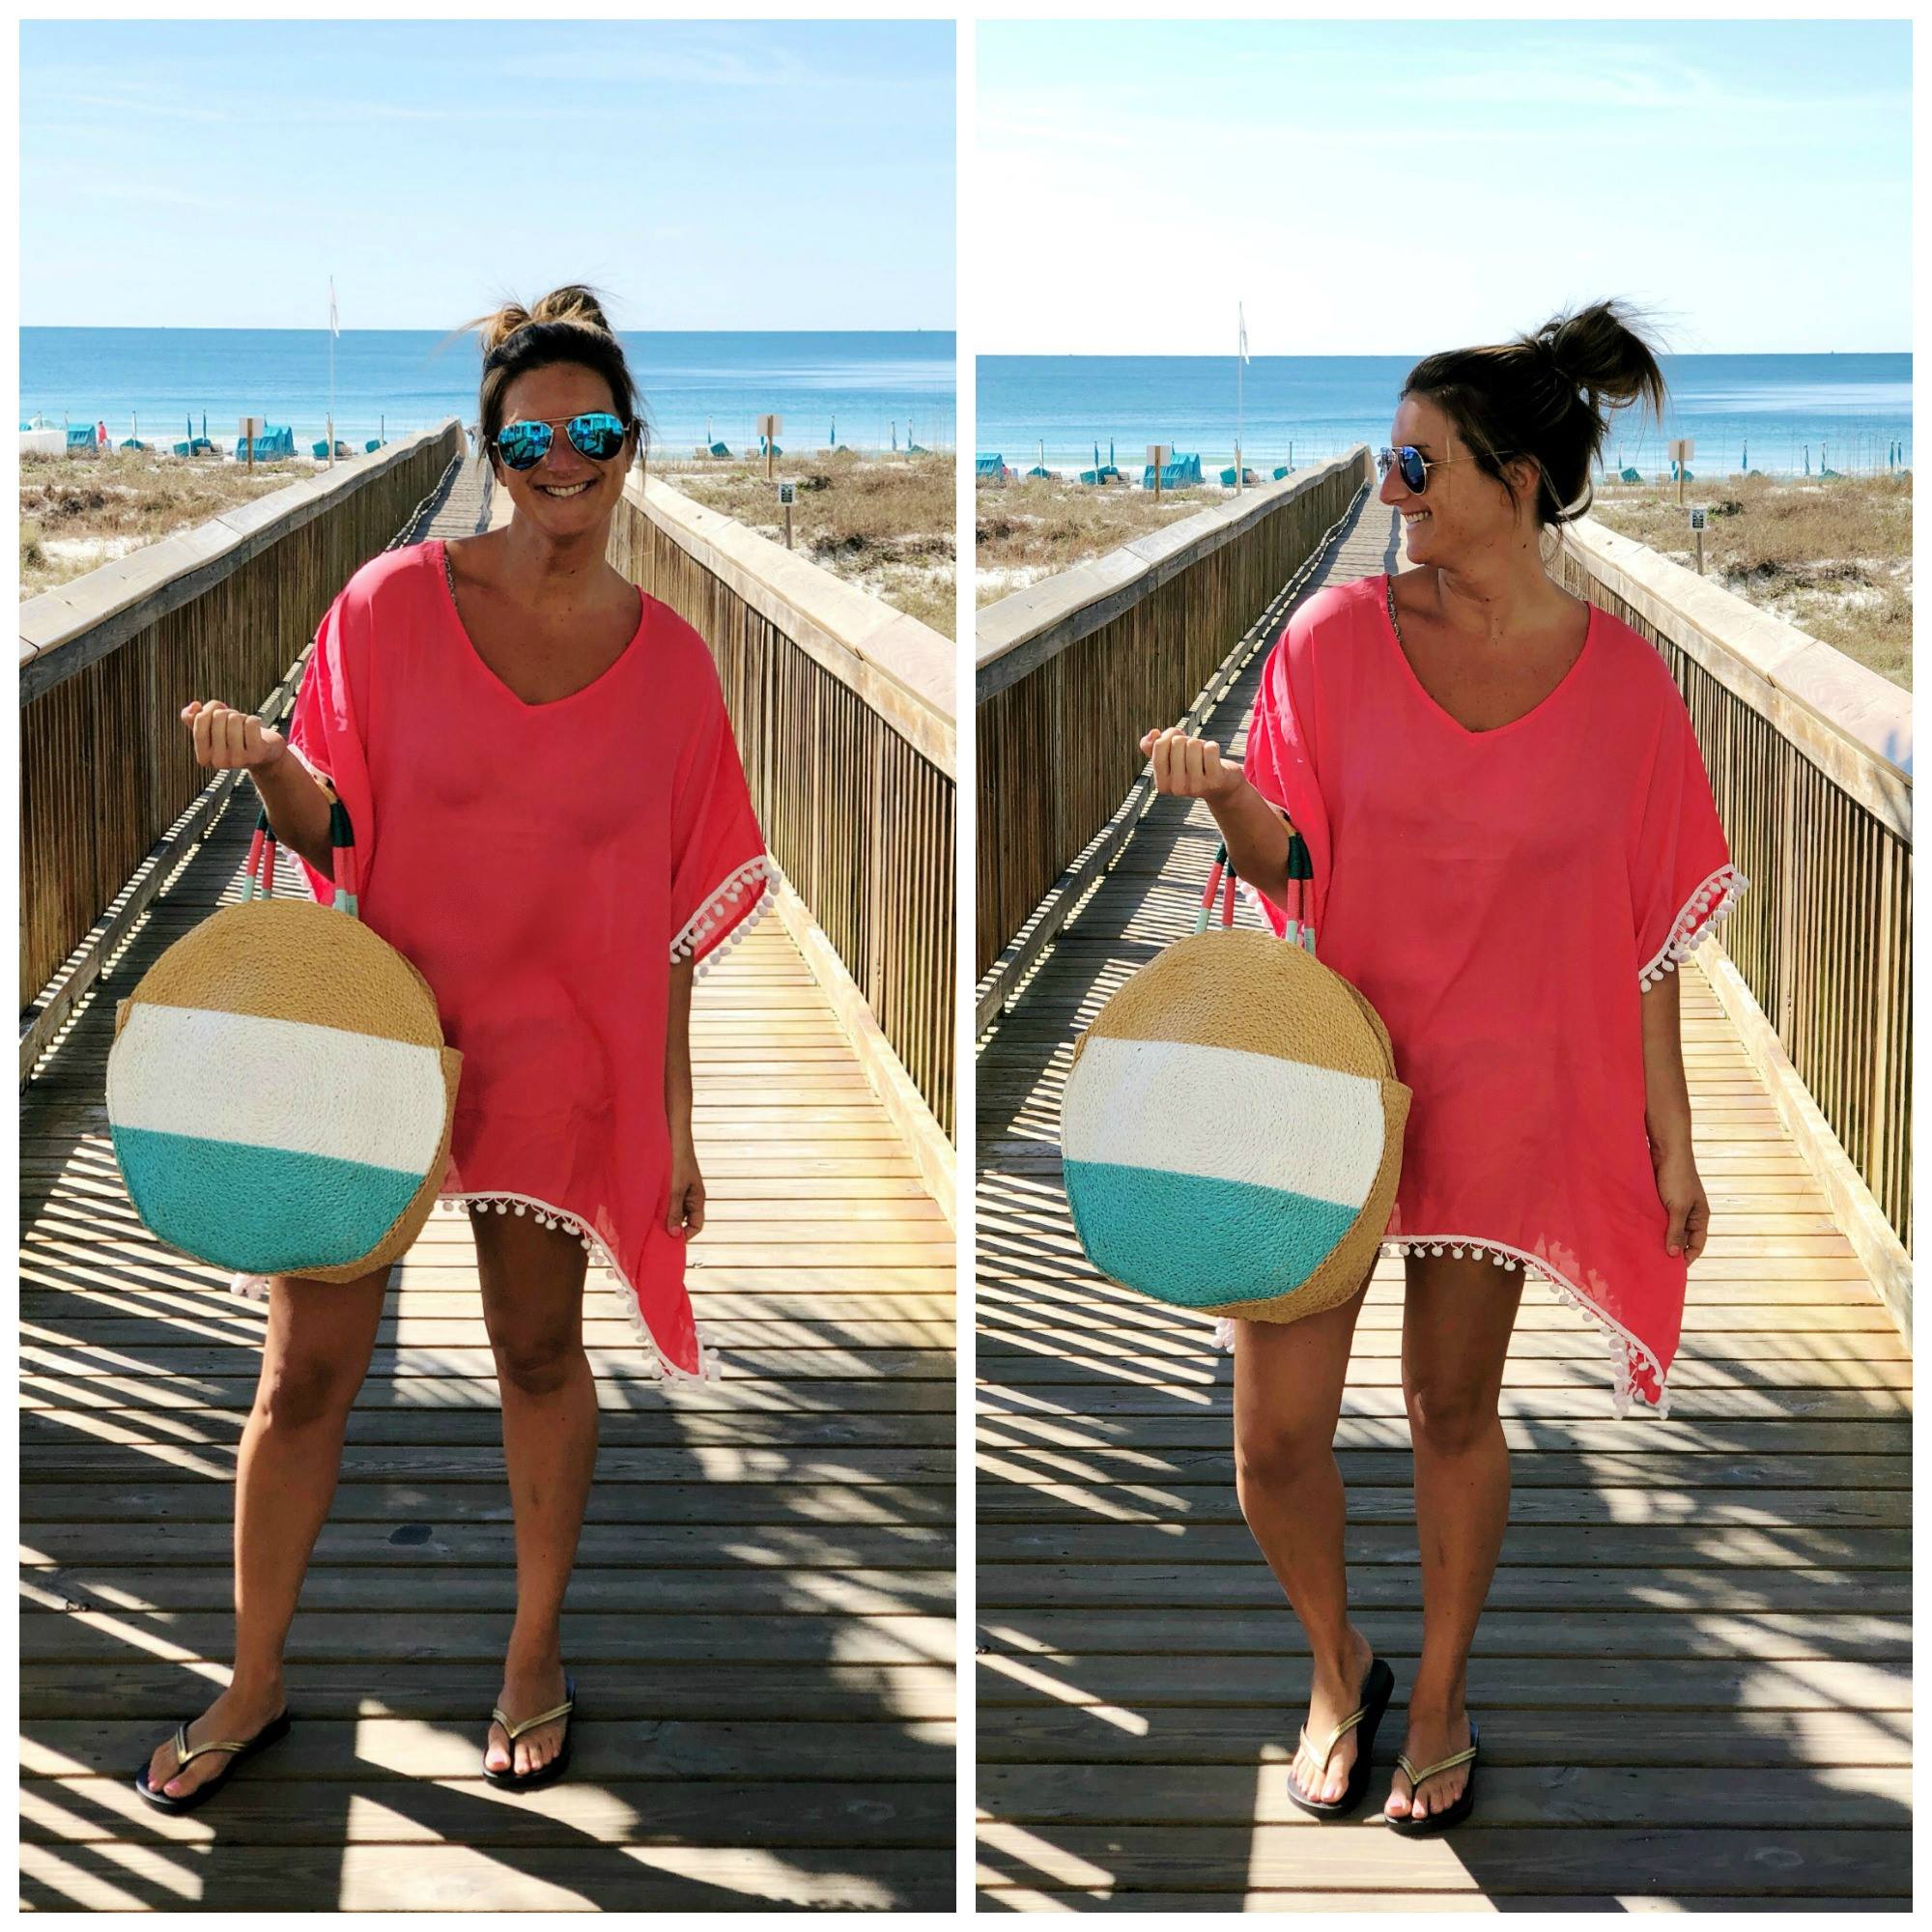 Beach wear // Beach outfit // what to wear to the beach // amazon finds